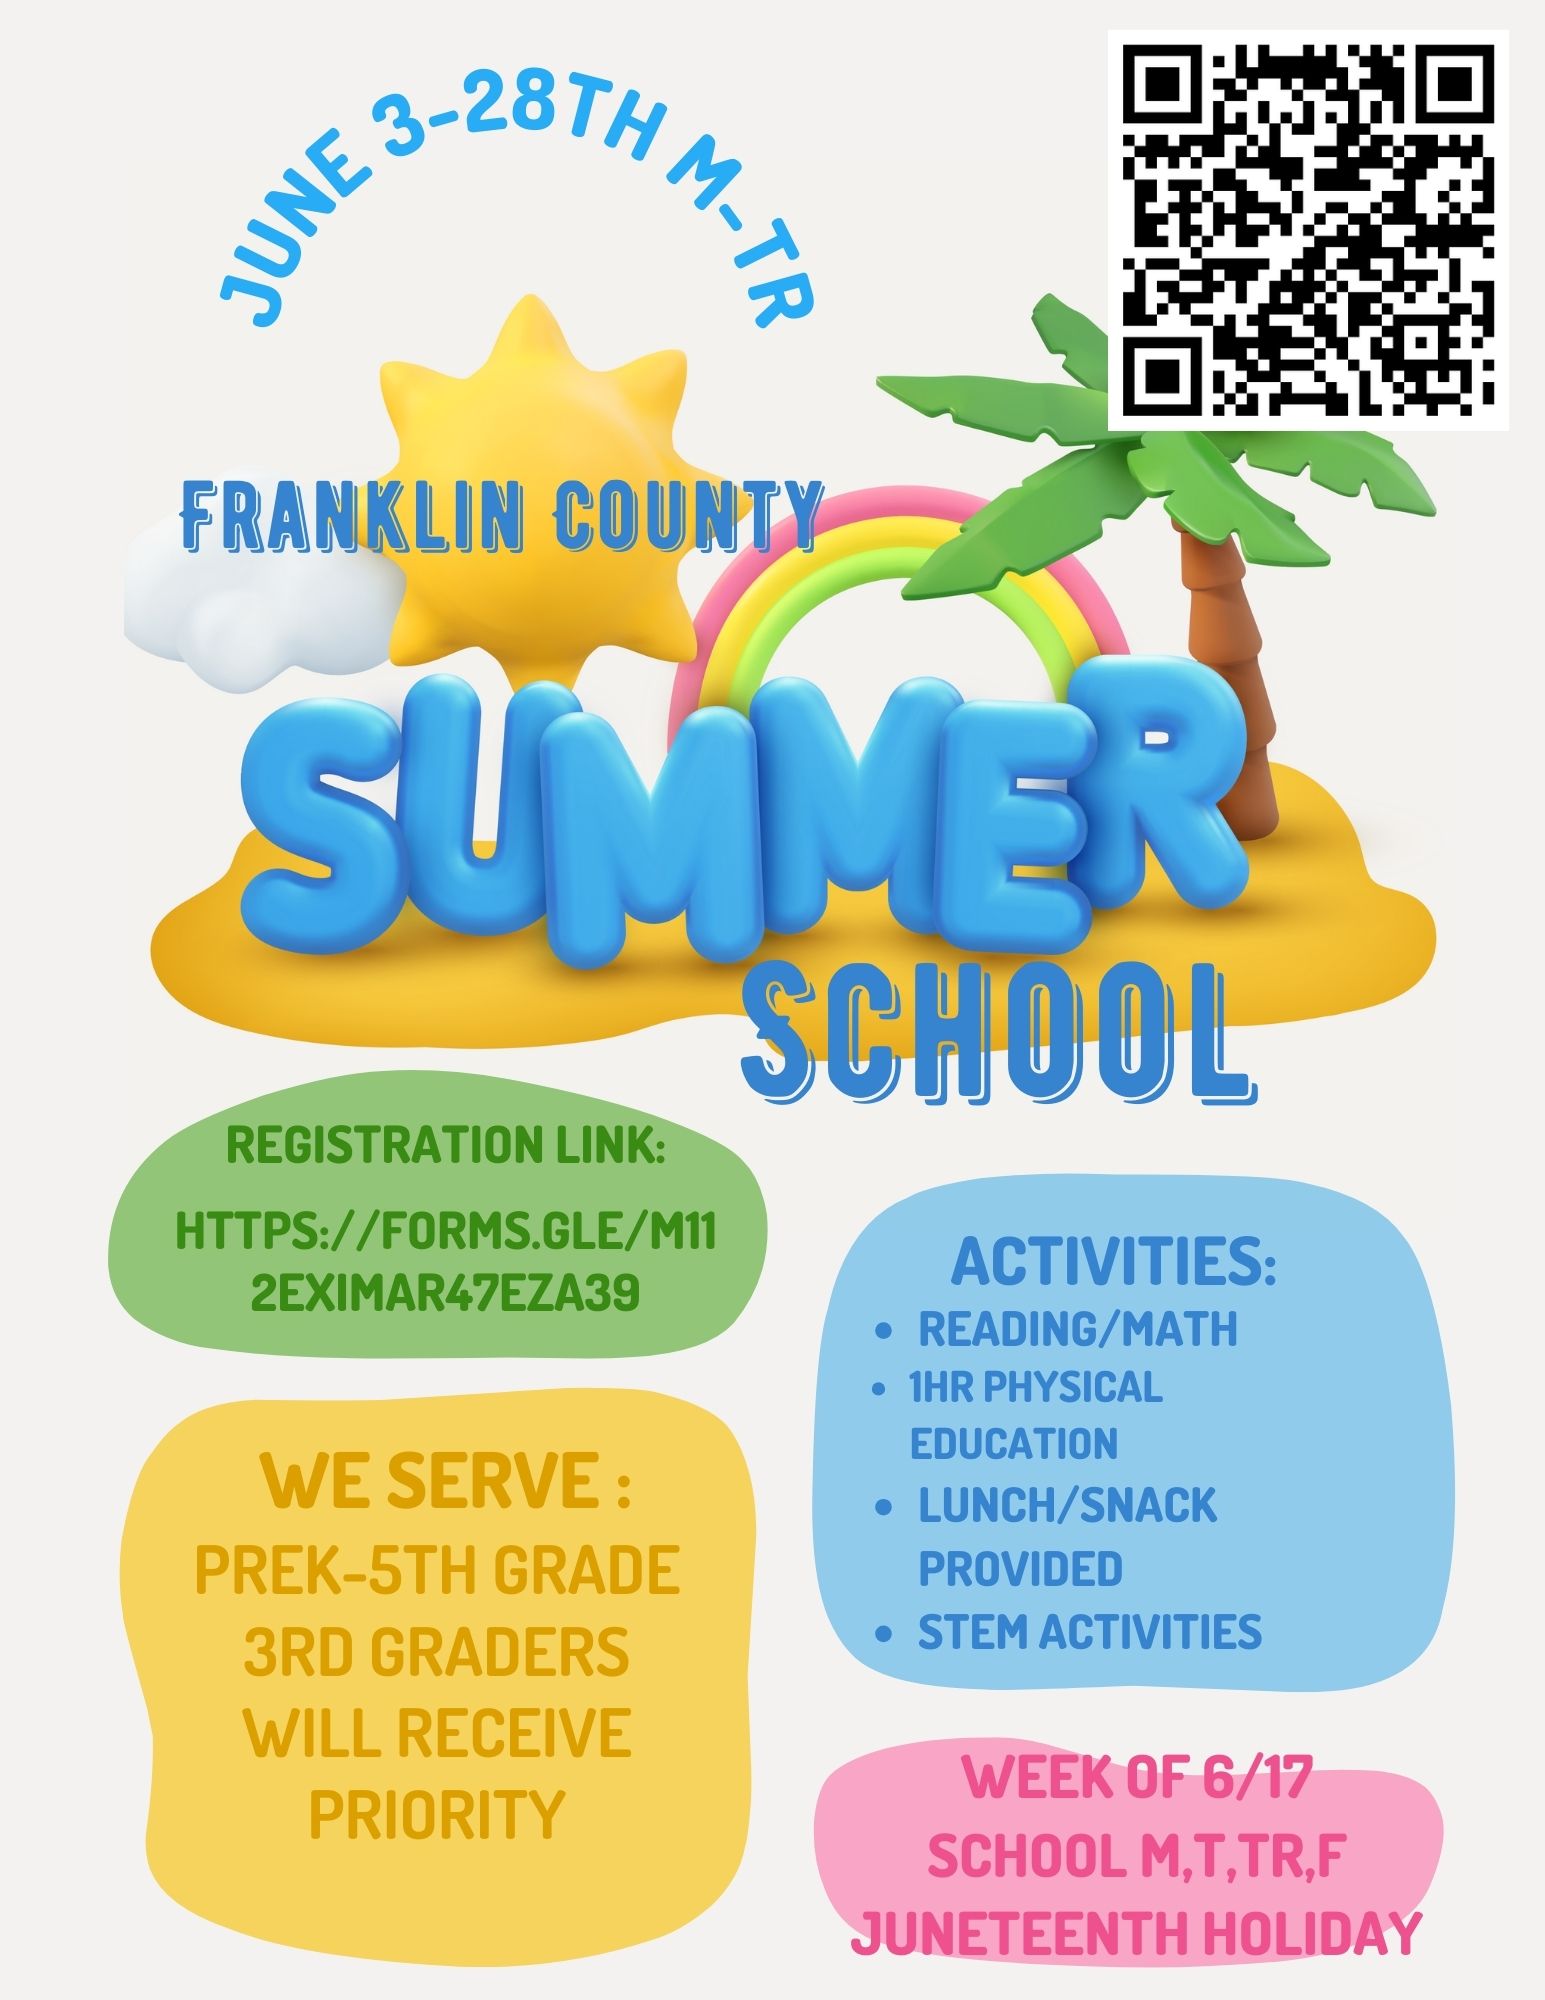 Summer Camp Informational Graphic. June 3-28th (M-TH) 8am-3 pm. for Prek-5th Grade with 3rd graders receiving priority. Activities include reading/math lessons, 1 HR PE, lunch and snack provided, and STEM activities. *Note Week of June 17th - Closed on 6/19 for Juneteenth. Open on Friday, June 21st instead. click here for the registration link.